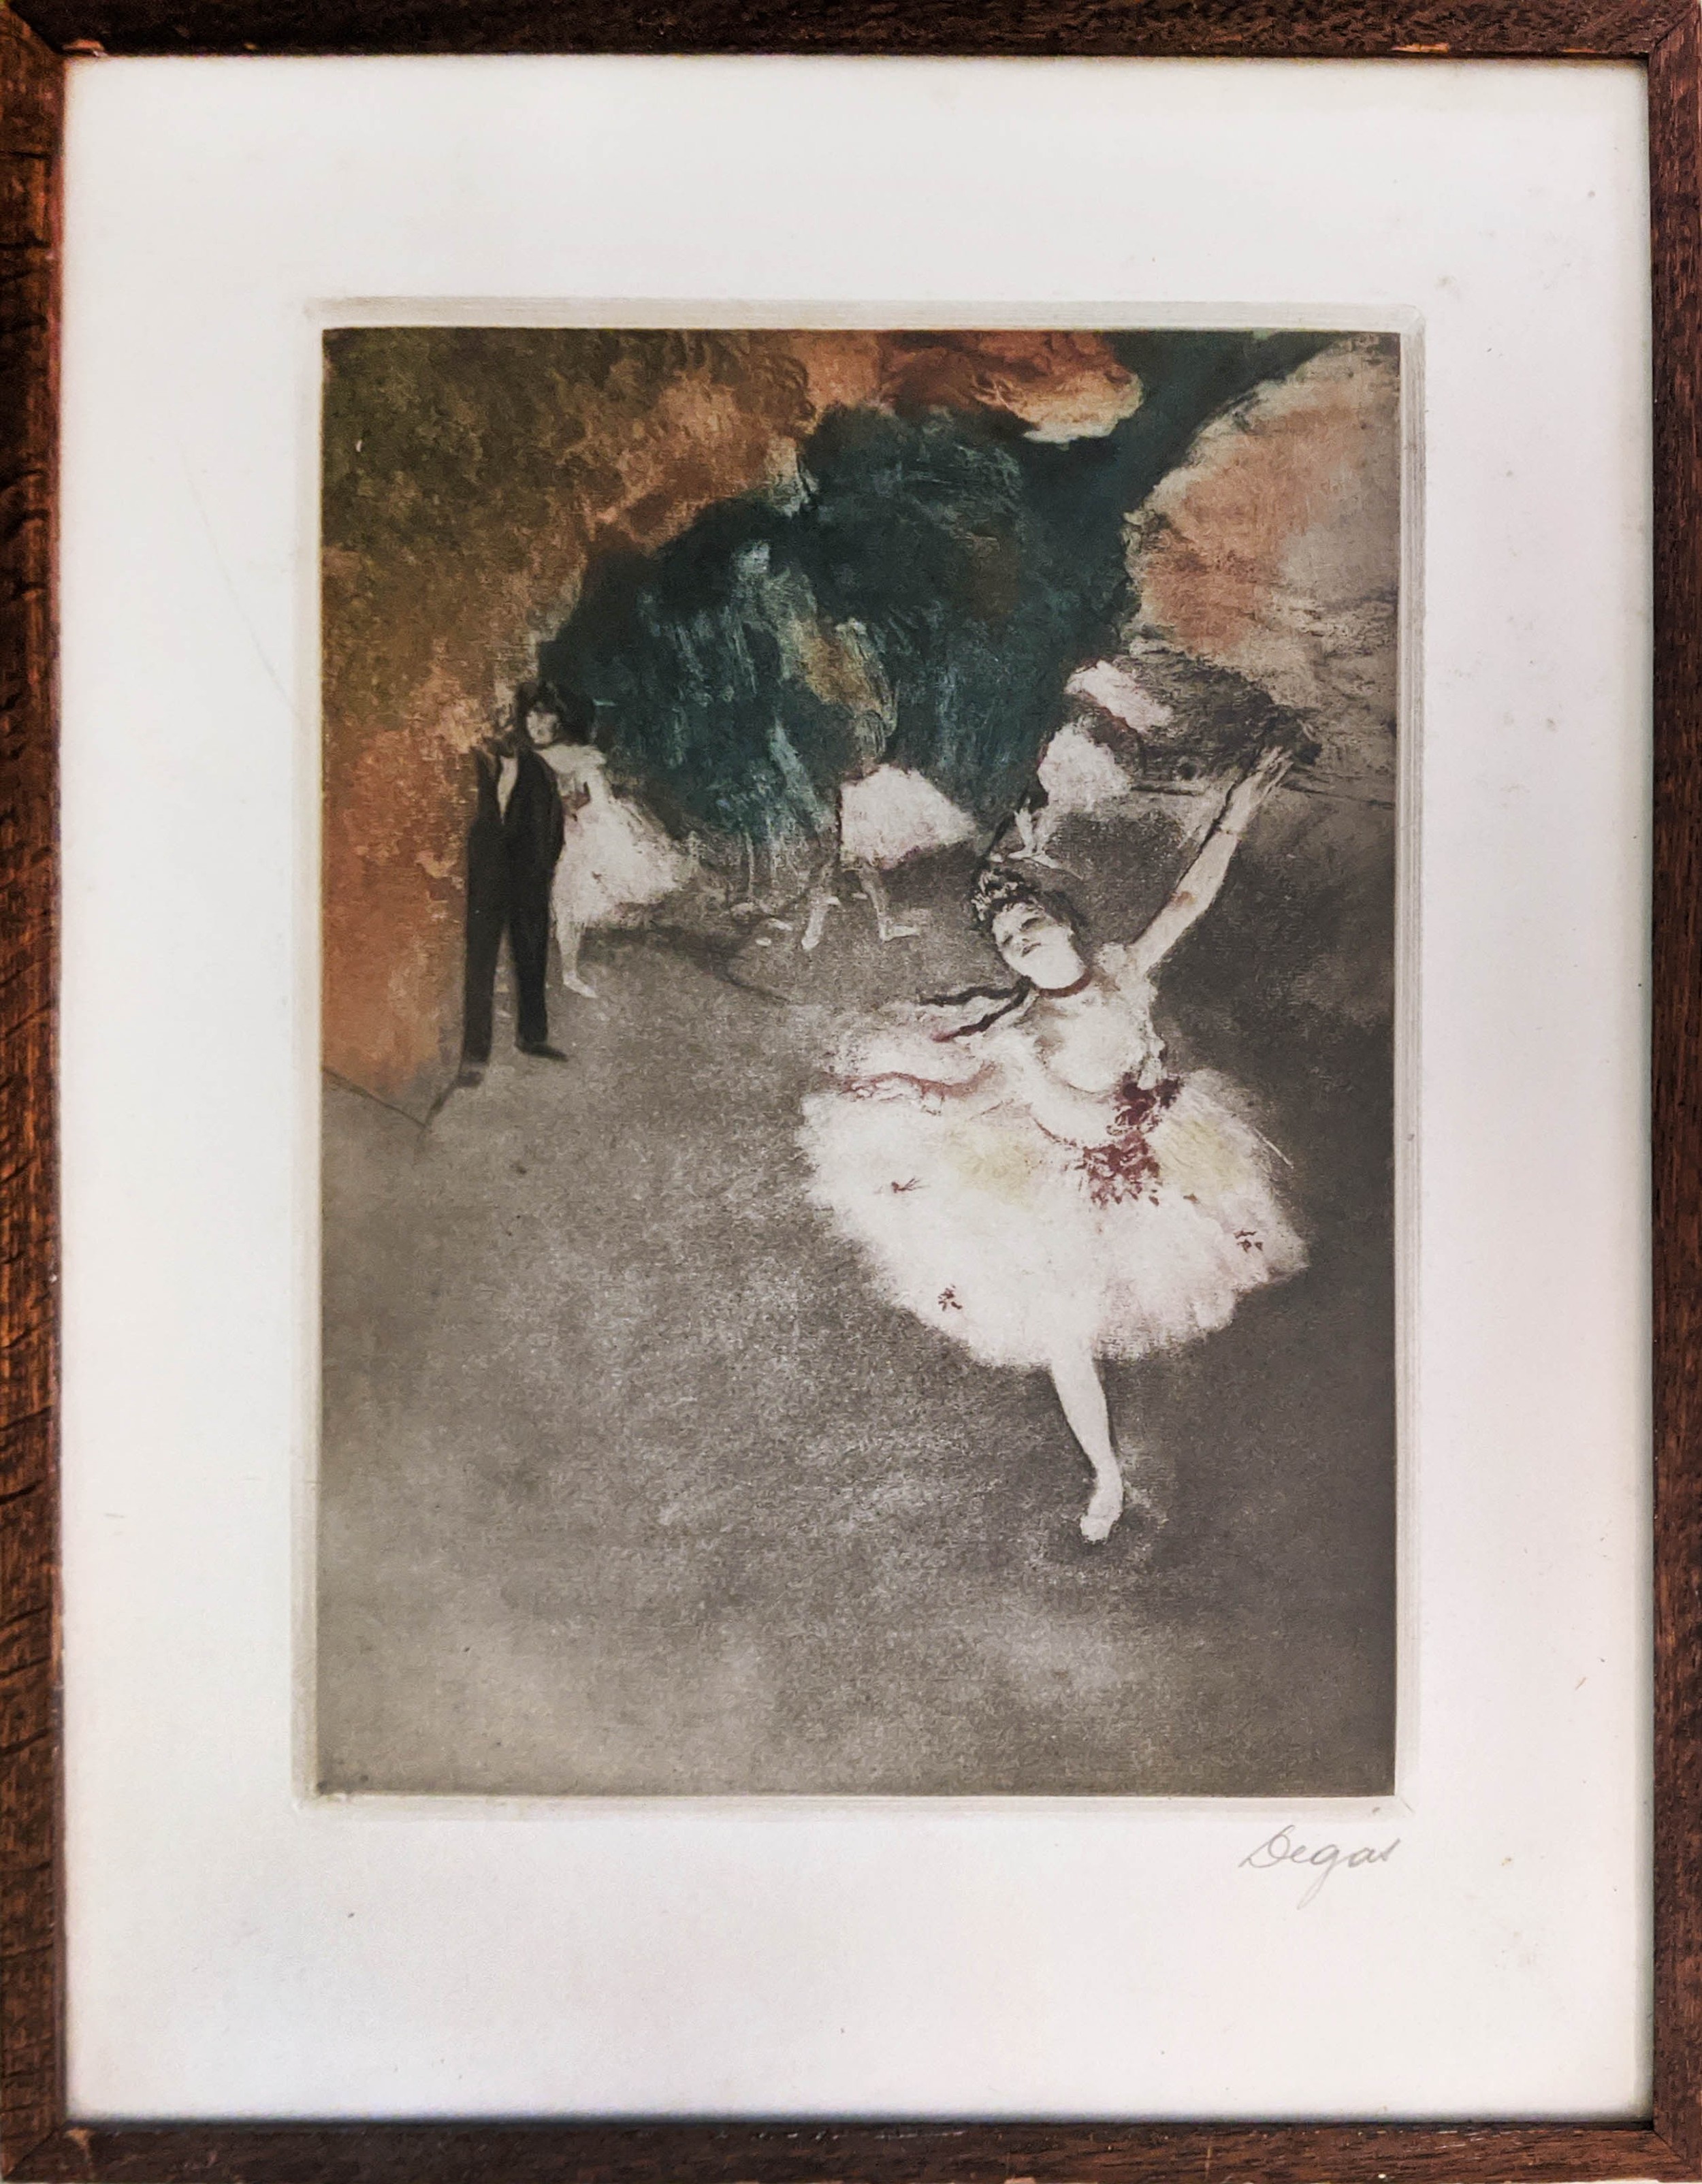 EDGAR DEGAS (French, 1834-1917), Aquatint etching on paper 'Ballerina', signed in pencil to